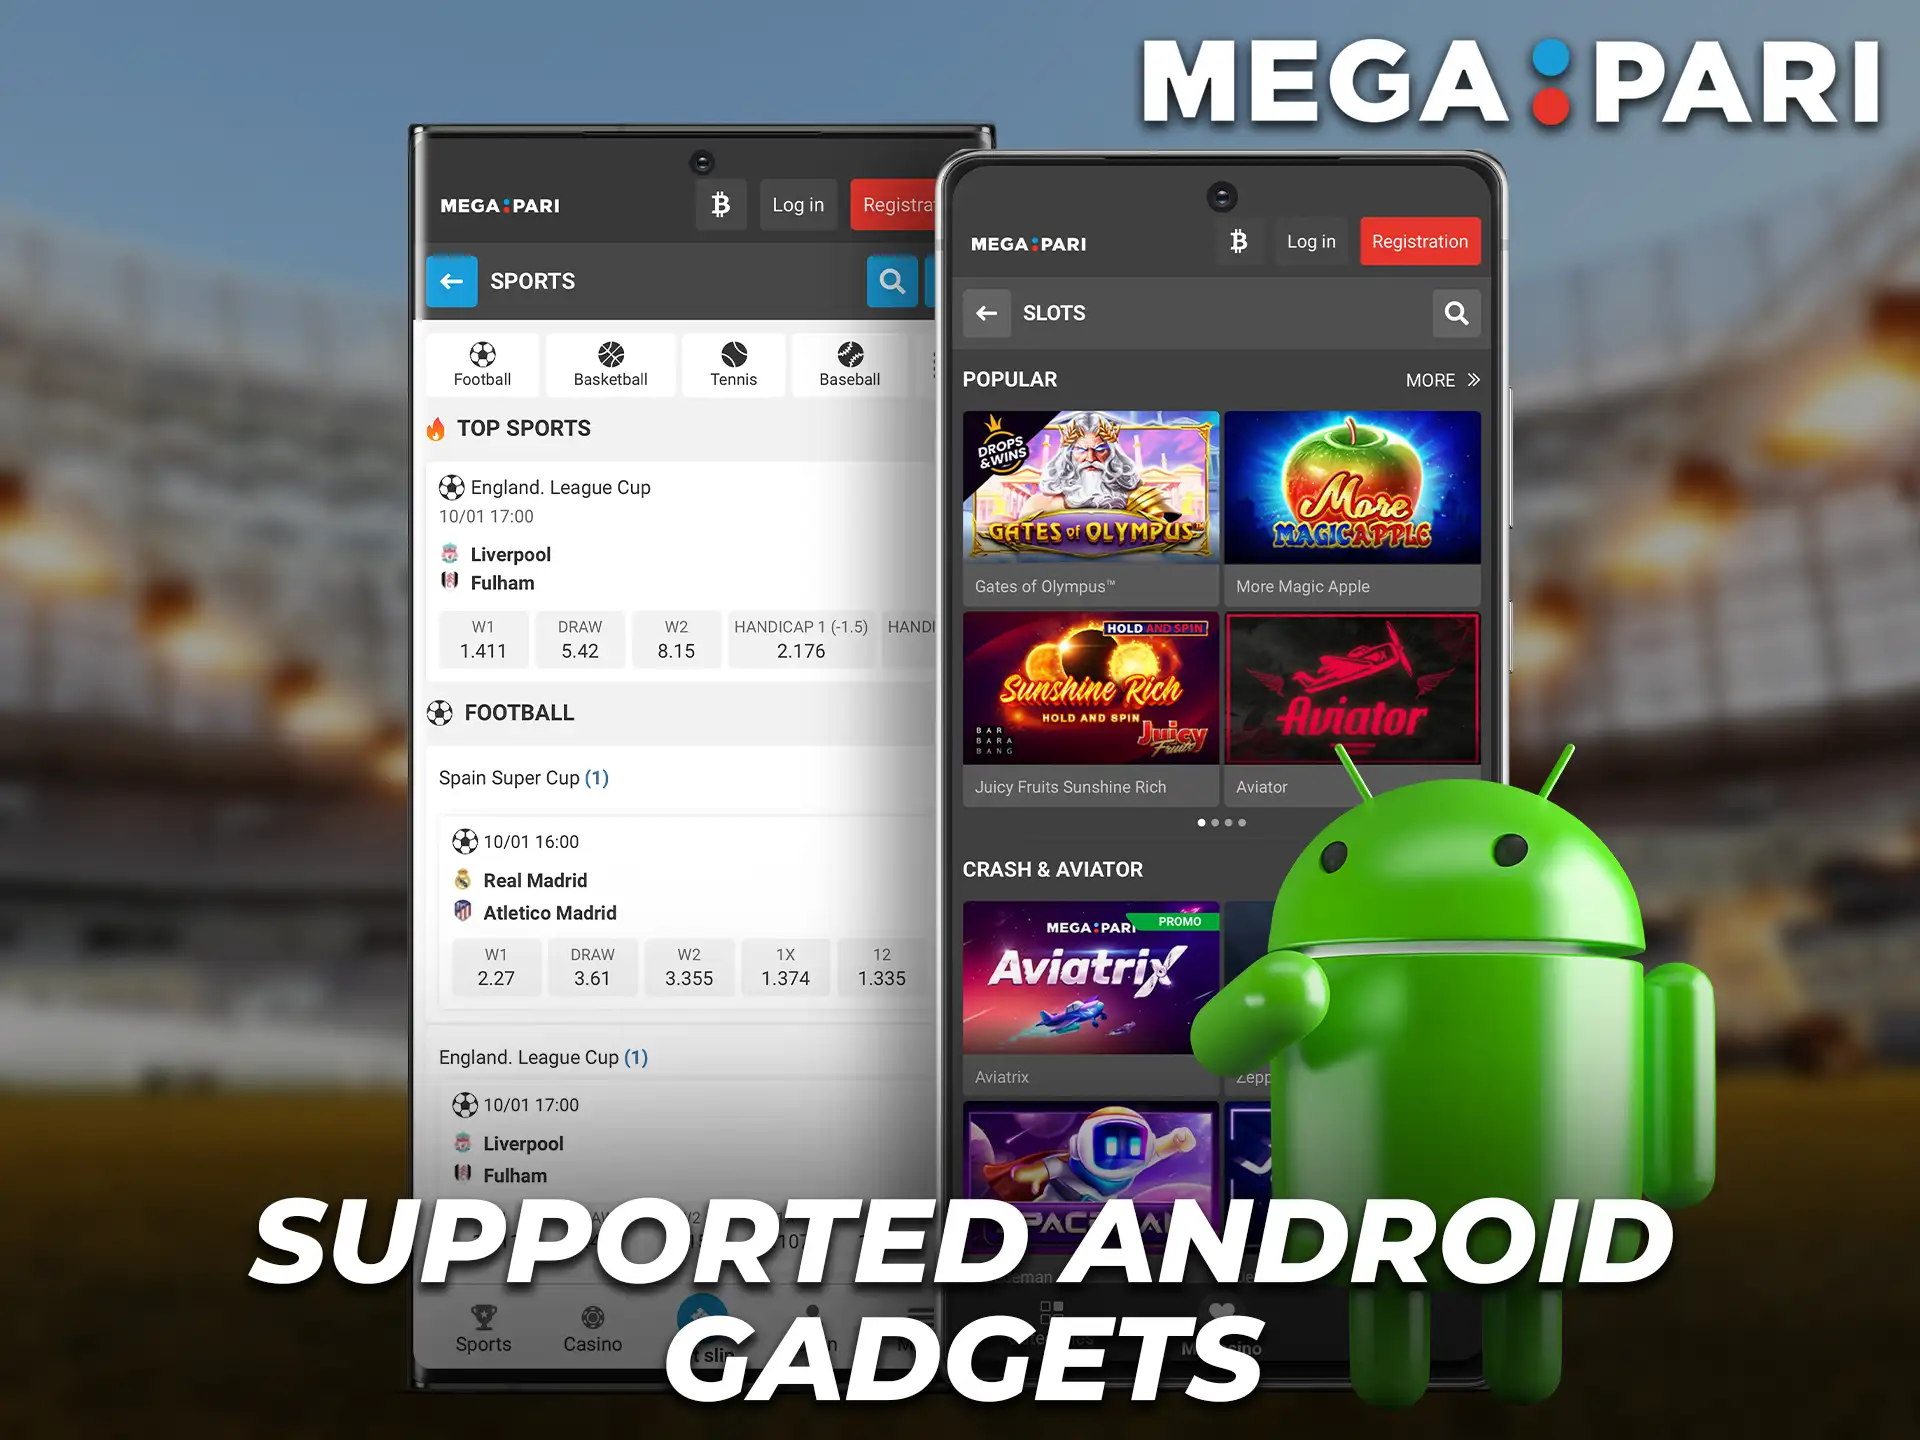 Megapari app is supported on many Android devices.